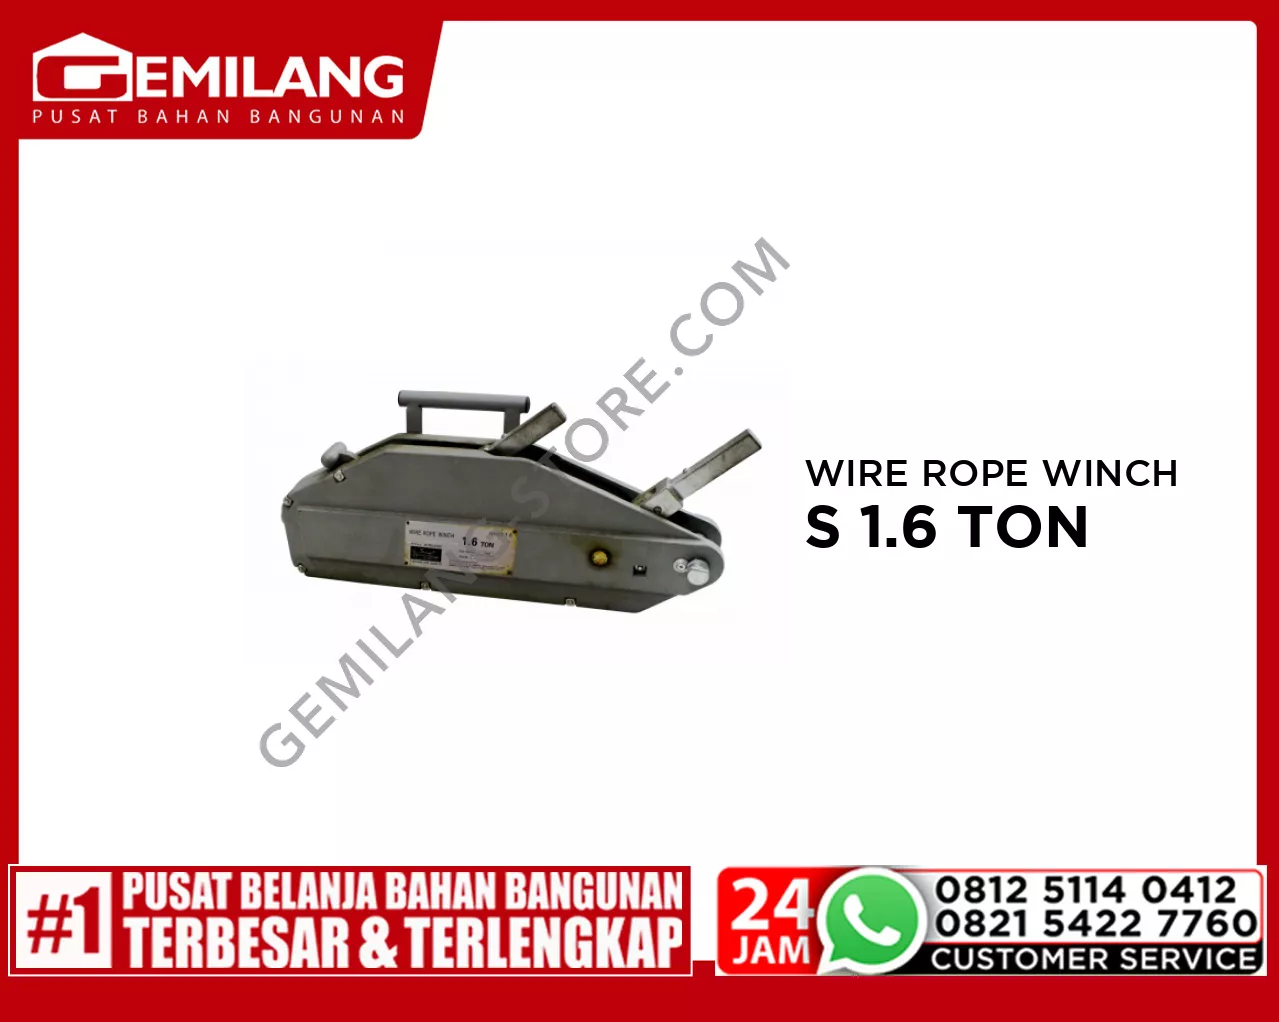 WIPRO WIRE ROPE WINCH (NHSSI 6)S 1.6T